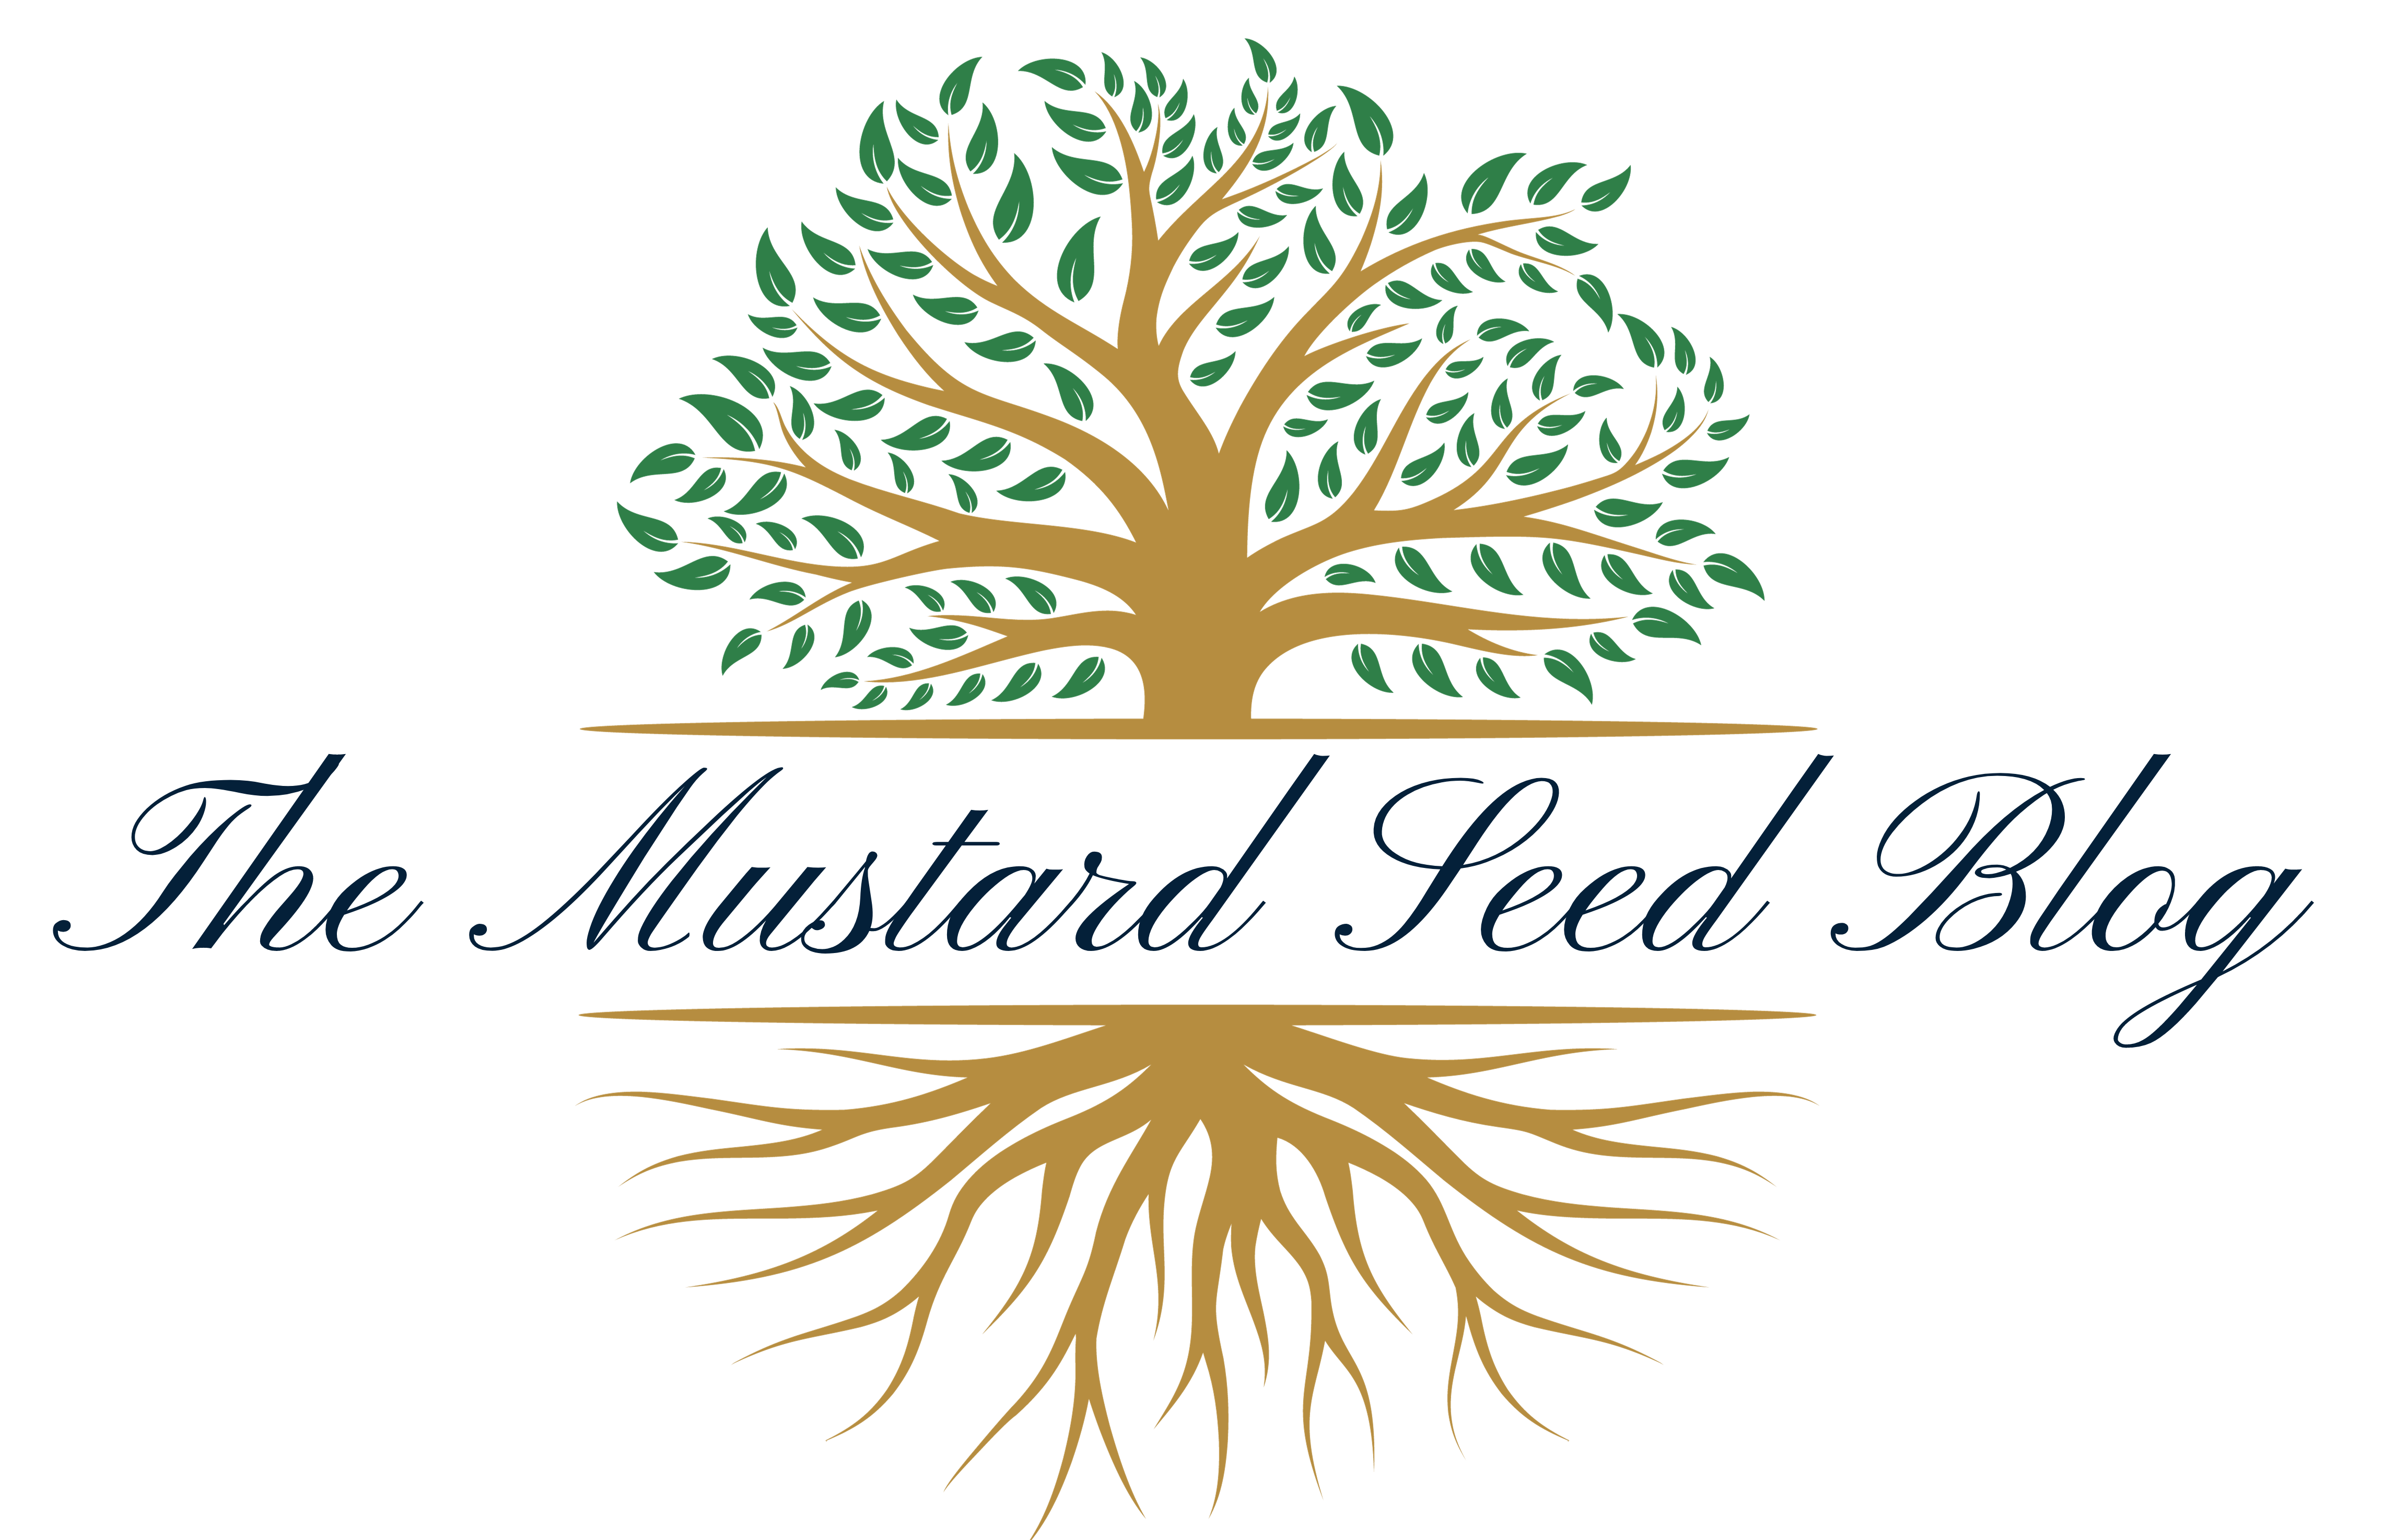 The Mustard Seed blog